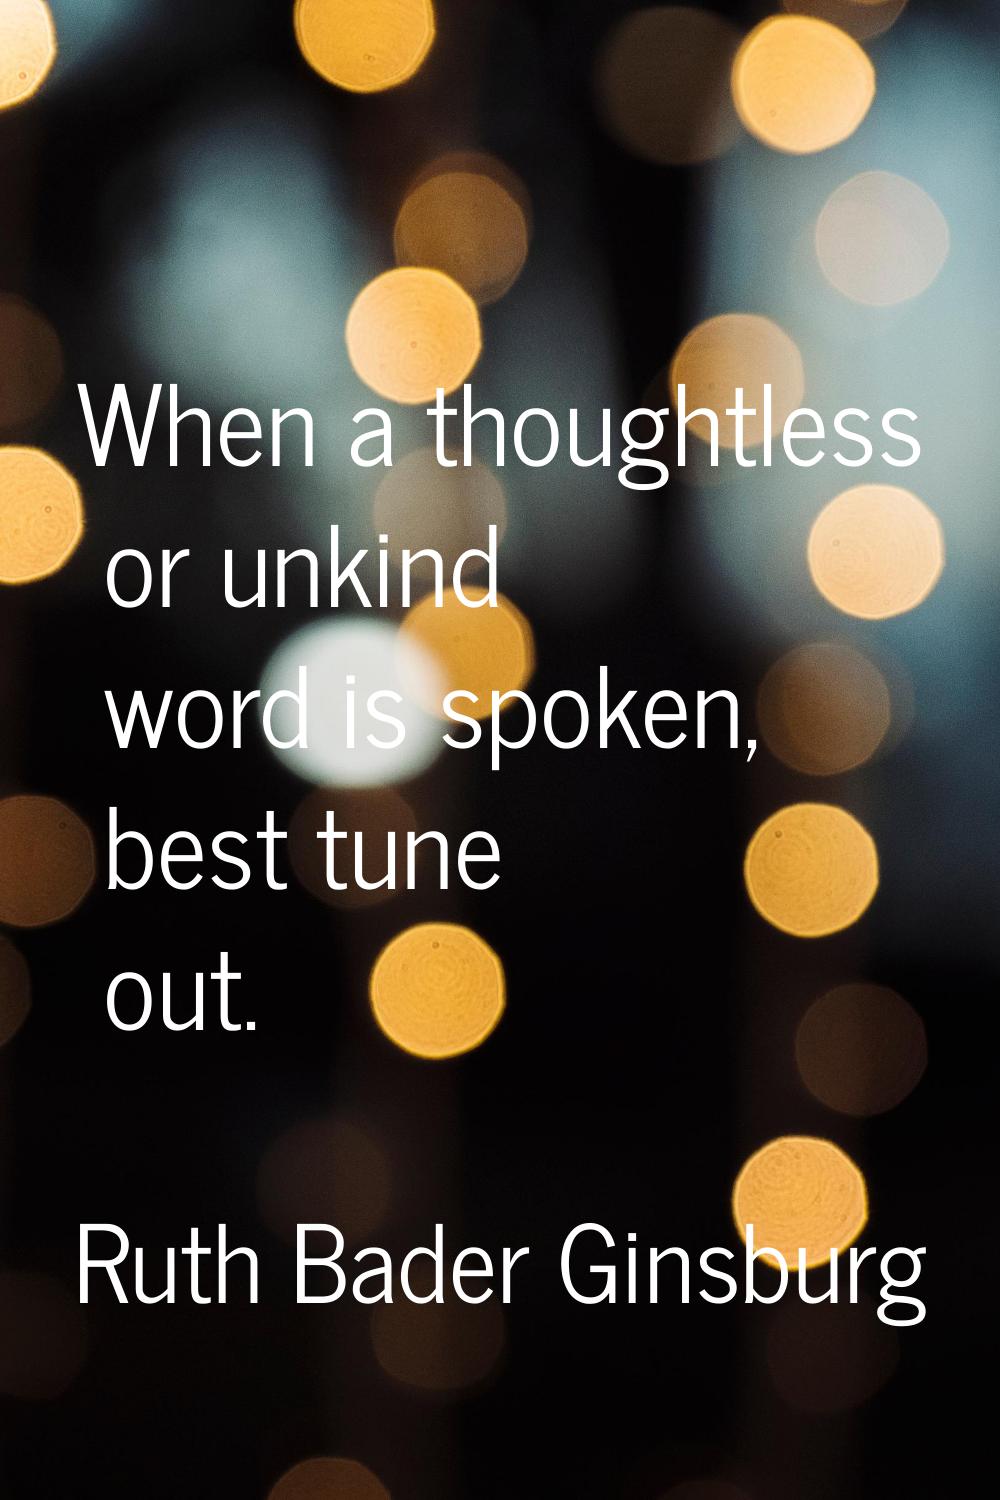 When a thoughtless or unkind word is spoken, best tune out.